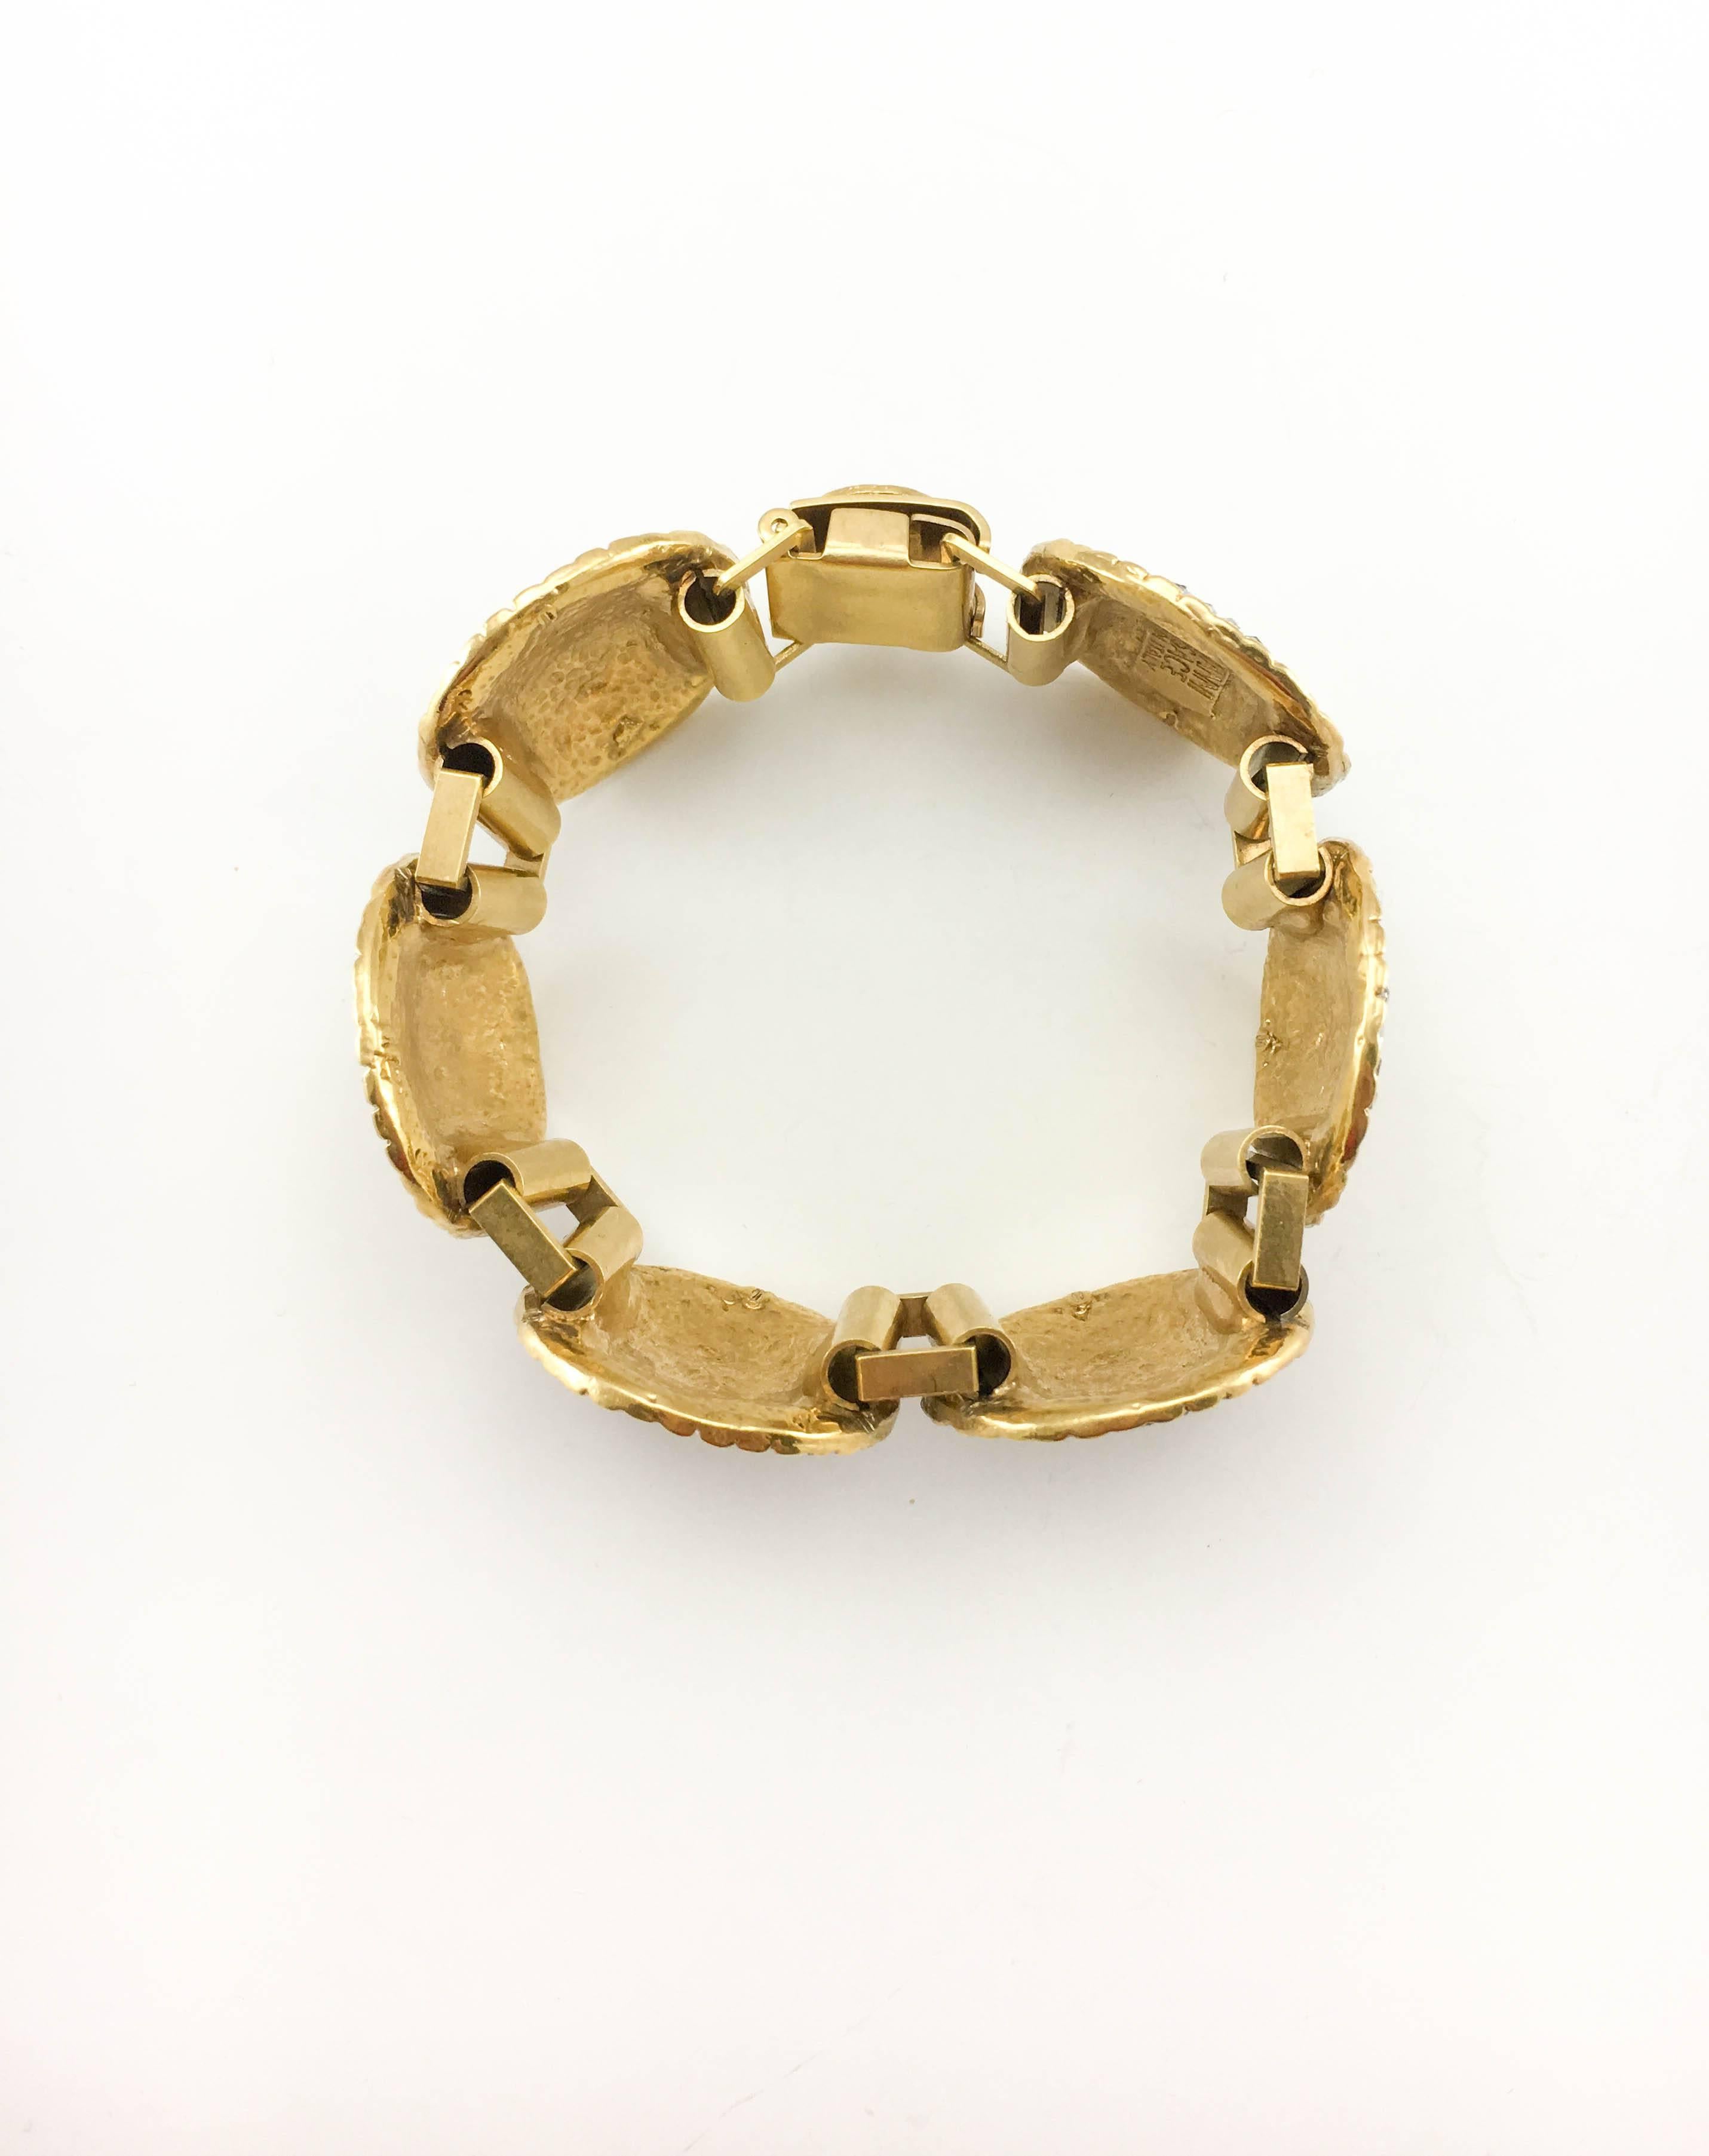 1990's Gianni Versace Gold-Plated Medusa Head with Rhinestones Bracelet For Sale 5